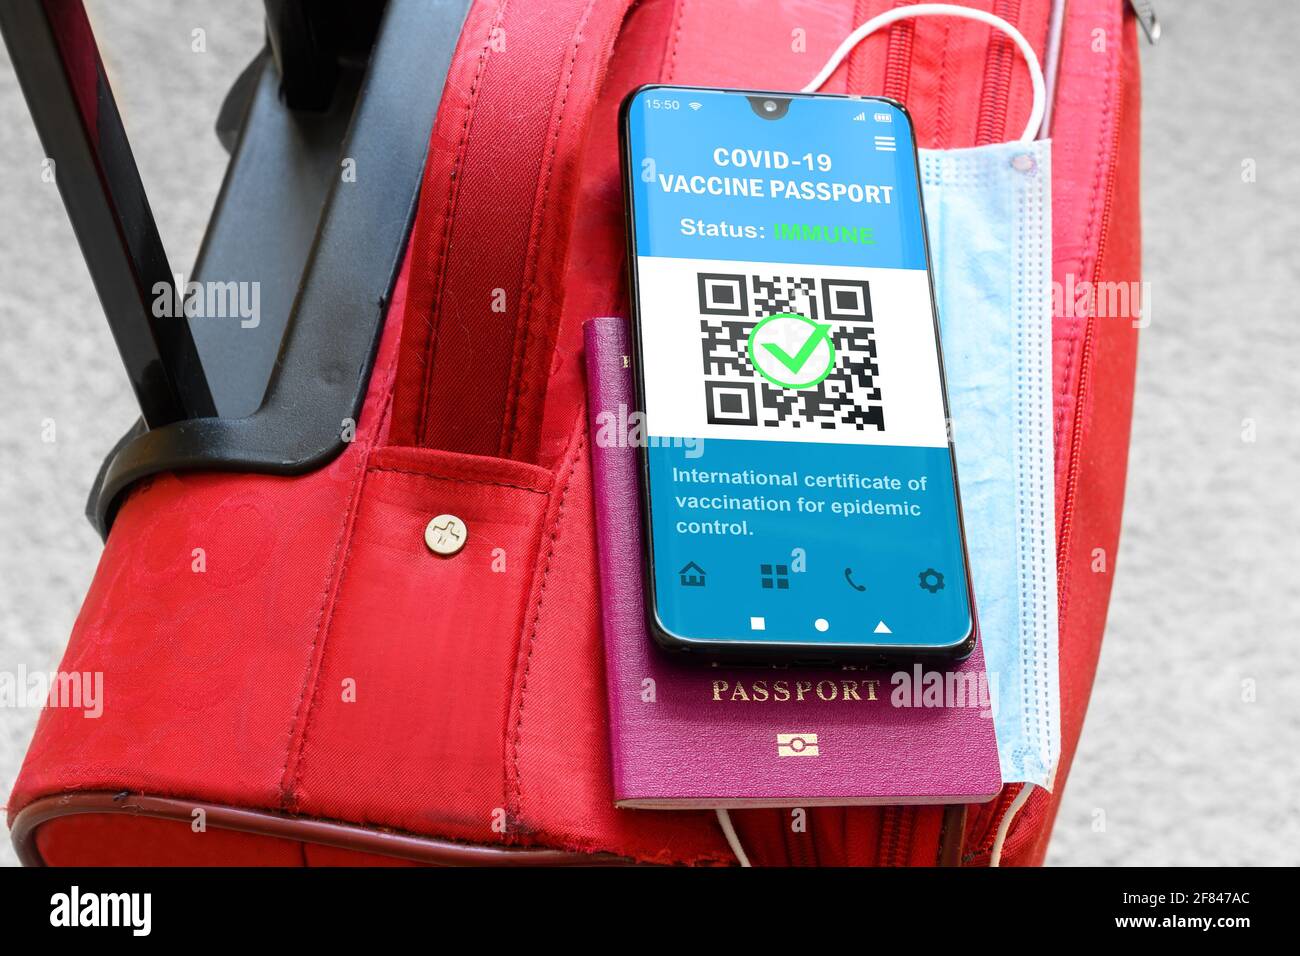 Health passport of COVID-19 vaccination in mobile phone for travel, smartphone with passport app on suitcase. Digital certificate as proof of coronavi Stock Photo